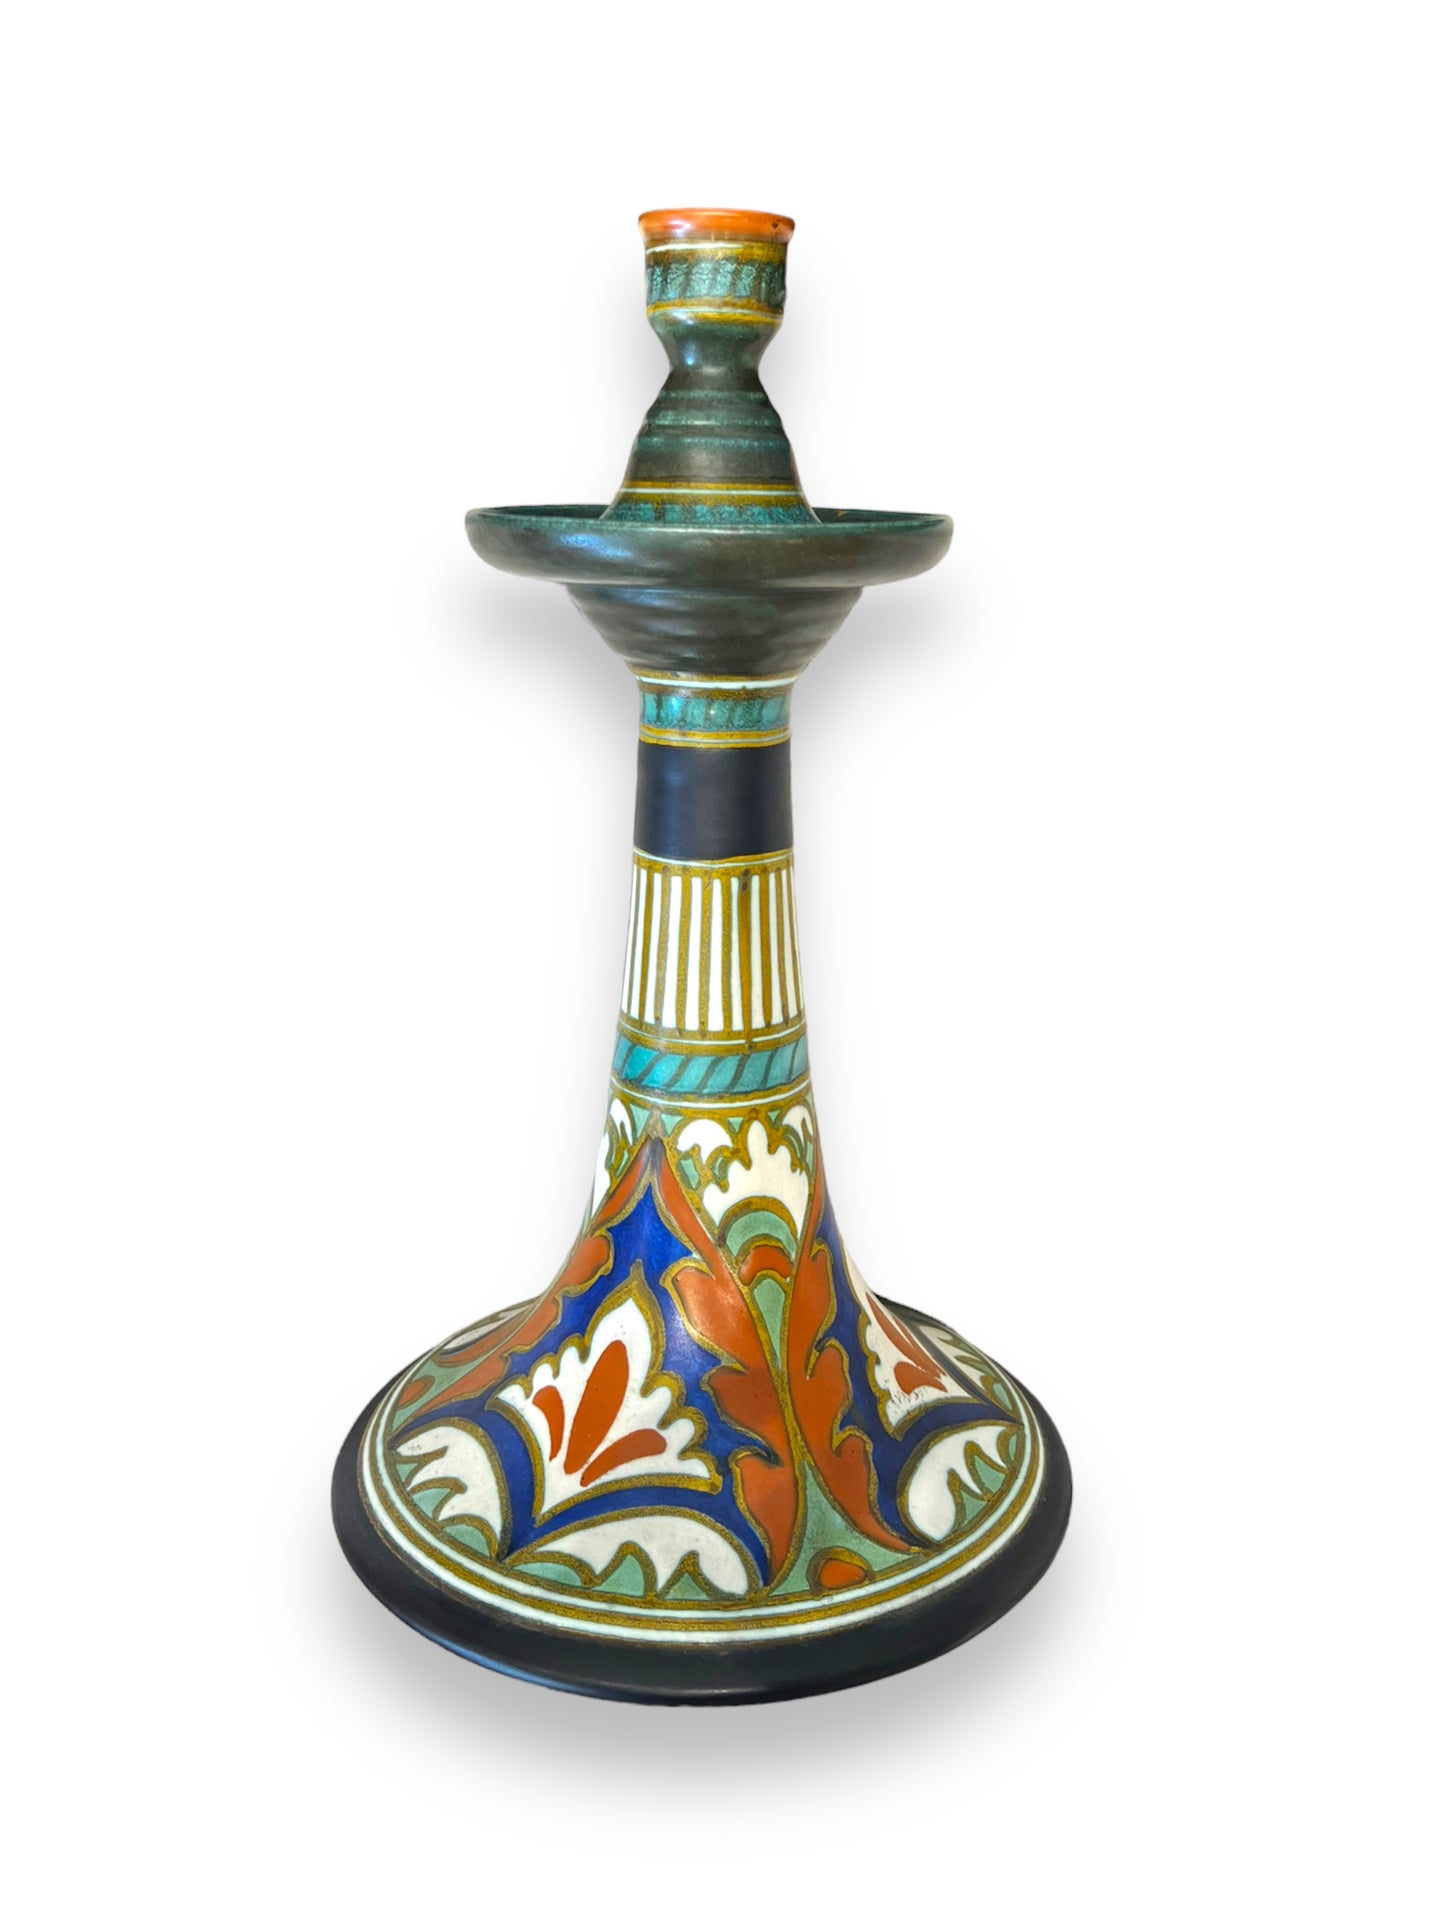 1924 Large Candle Holder - PZH Gouda - DeFrenS